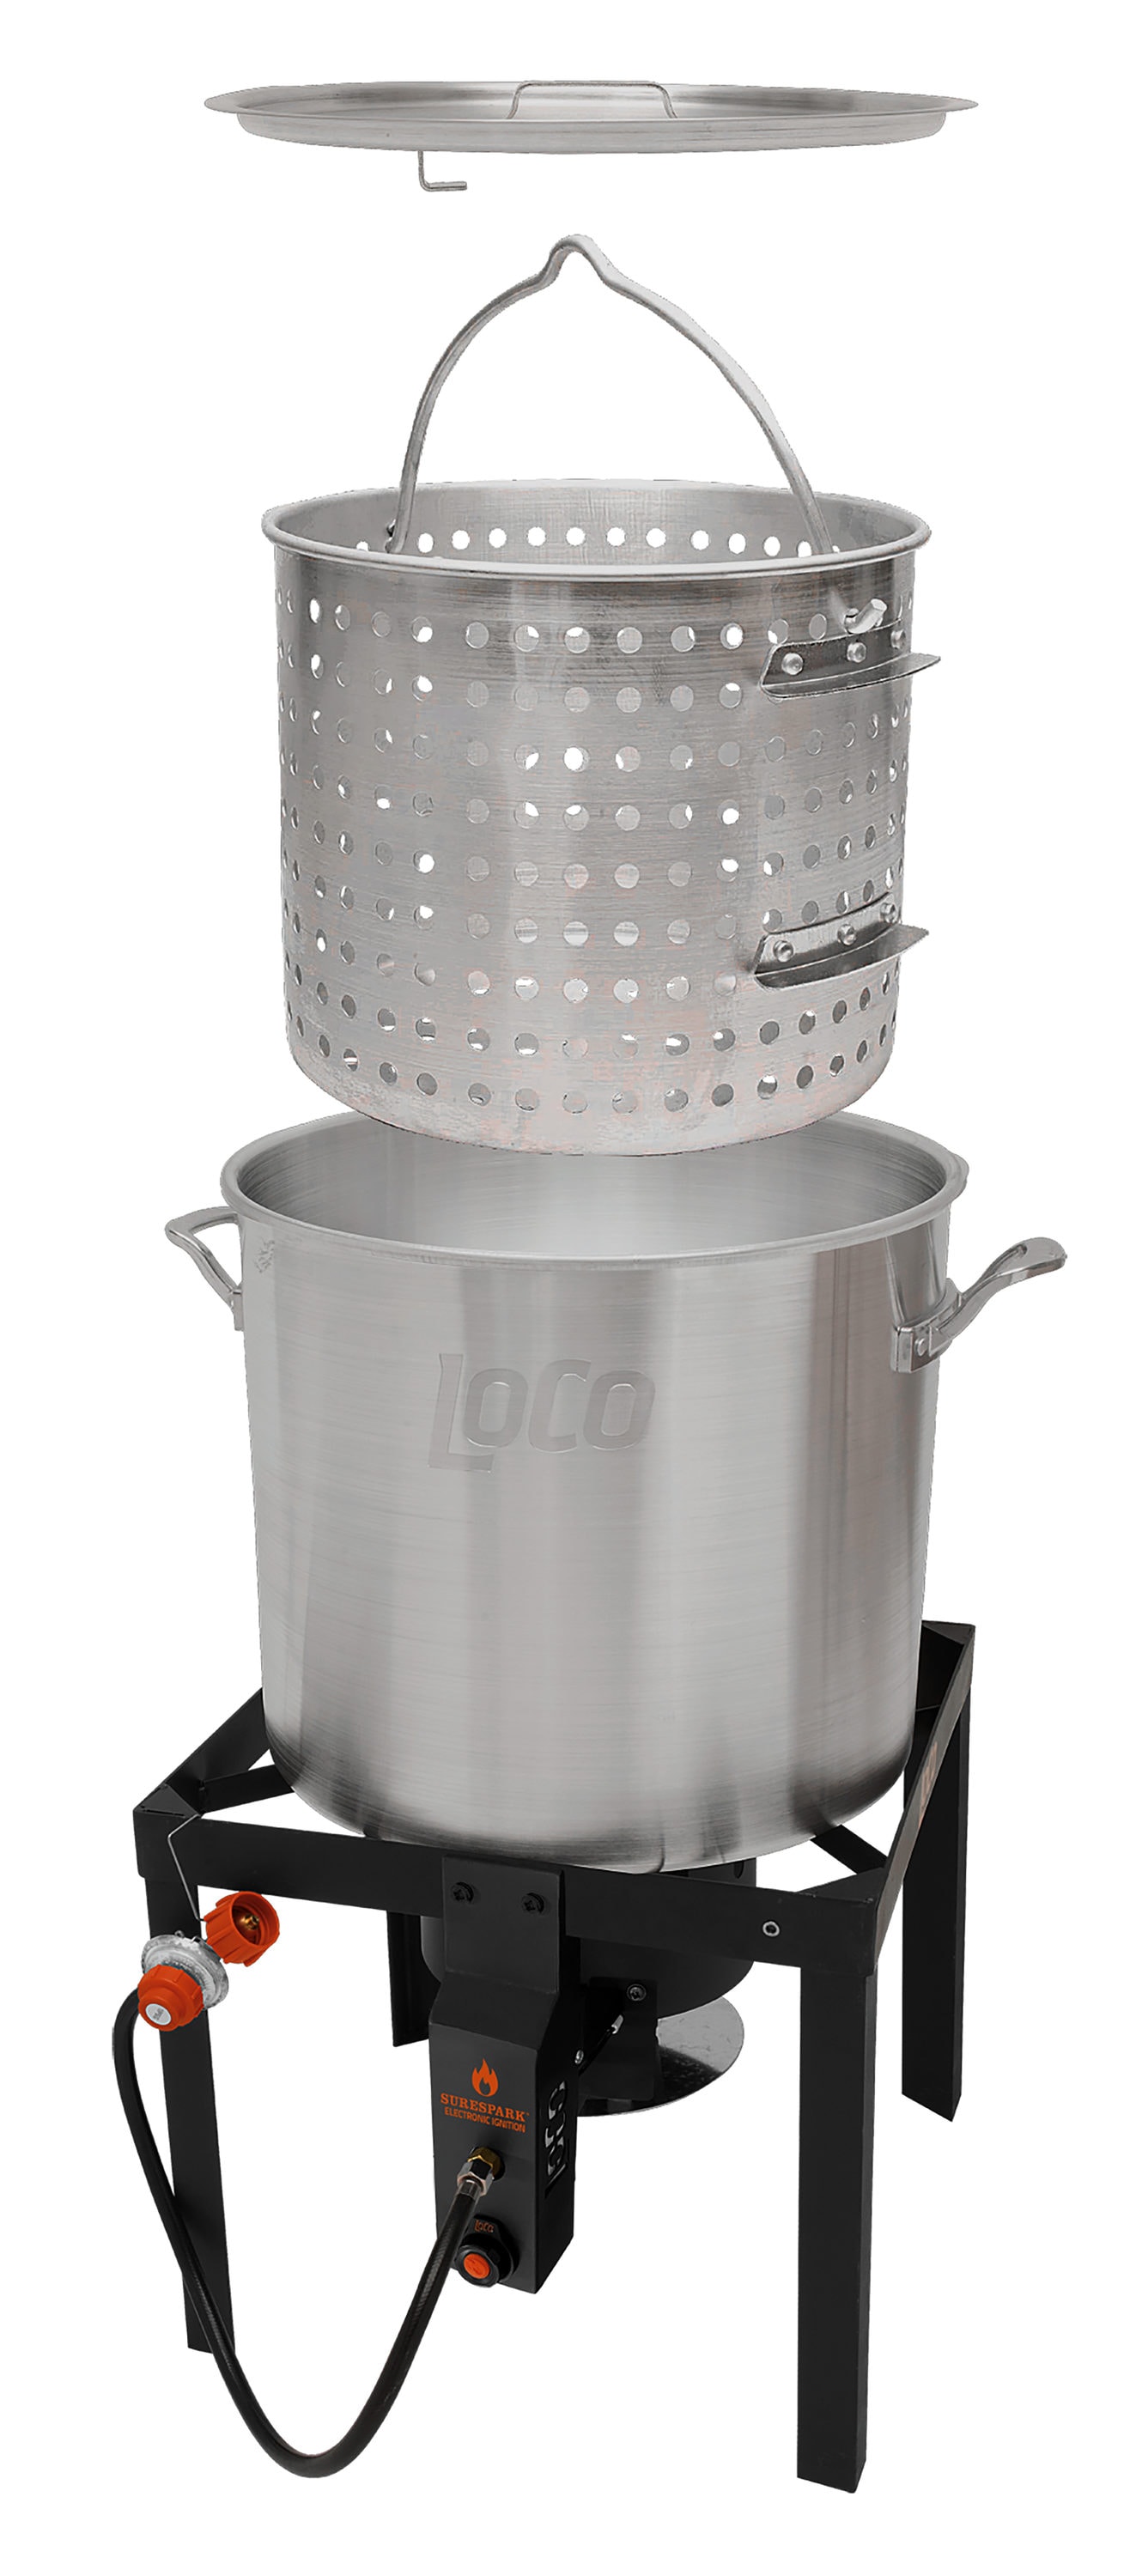 NEW 100QT Commercial Aluminum High Capacity Pressure Cooker Kettle Cooking  Large